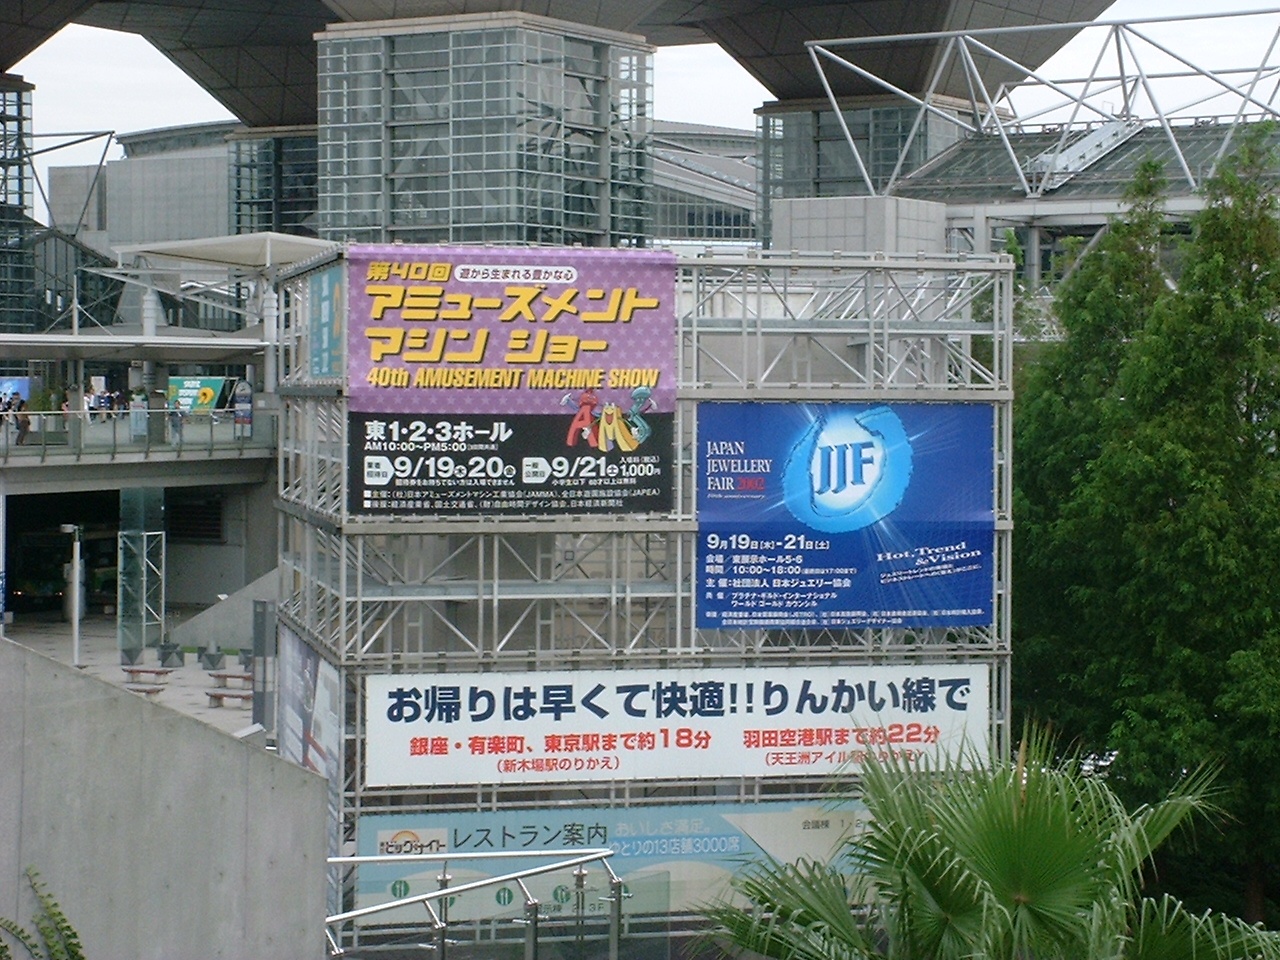 a bunch of signs showing various events at the convention centre